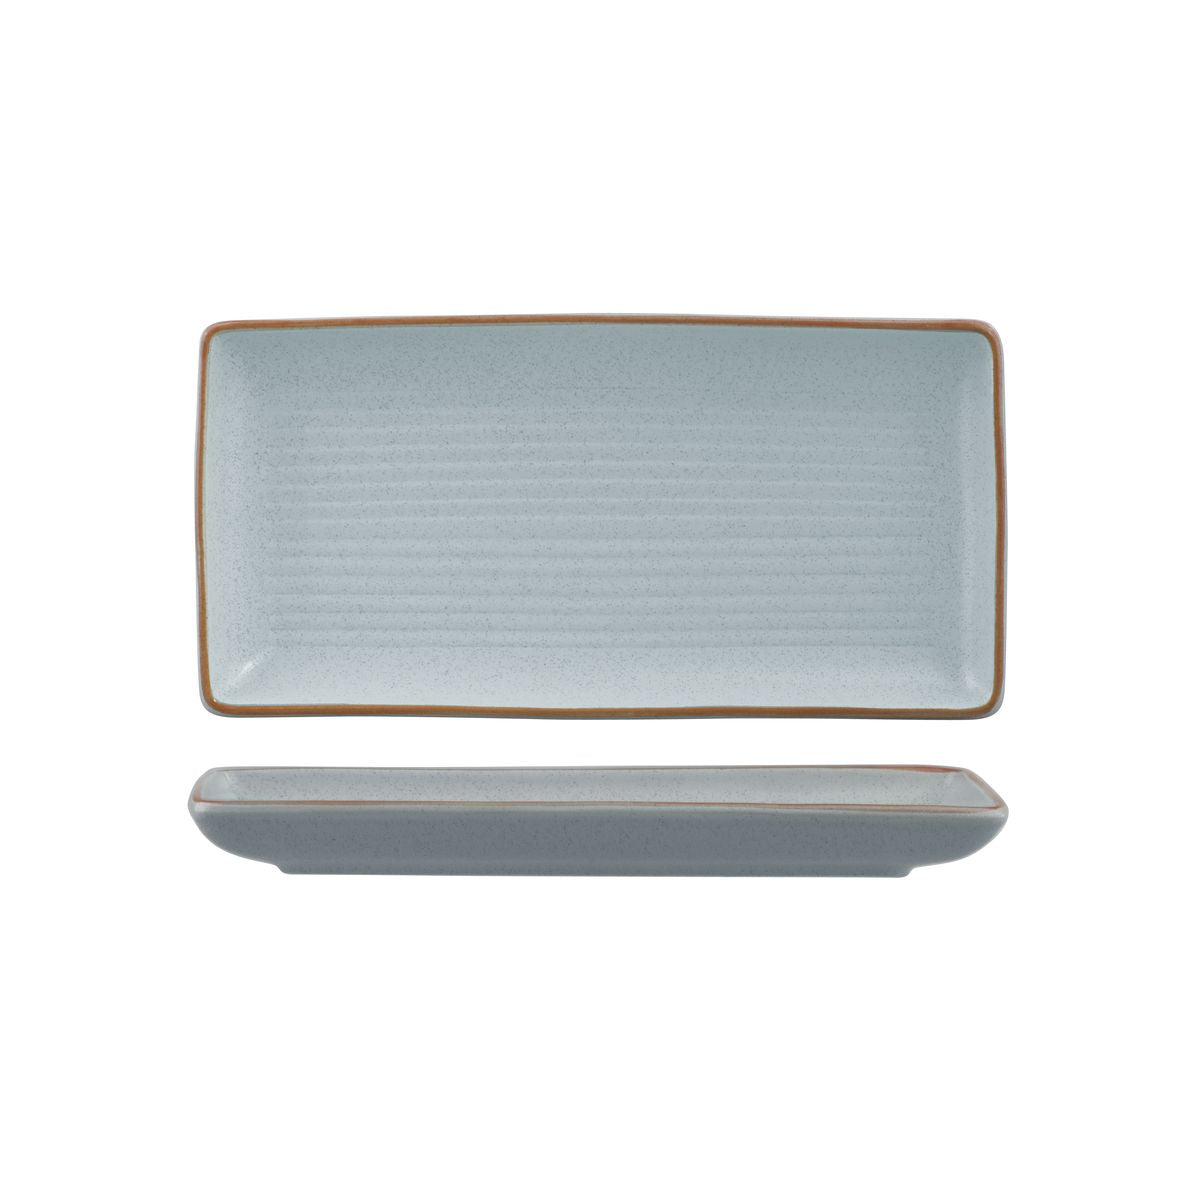 Share Platter - Ribbed, 250x125mm, Zuma Bluestone from Zuma. Ribbed, made out of Ceramic and sold in boxes of 6. Hospitality quality at wholesale price with The Flying Fork! 